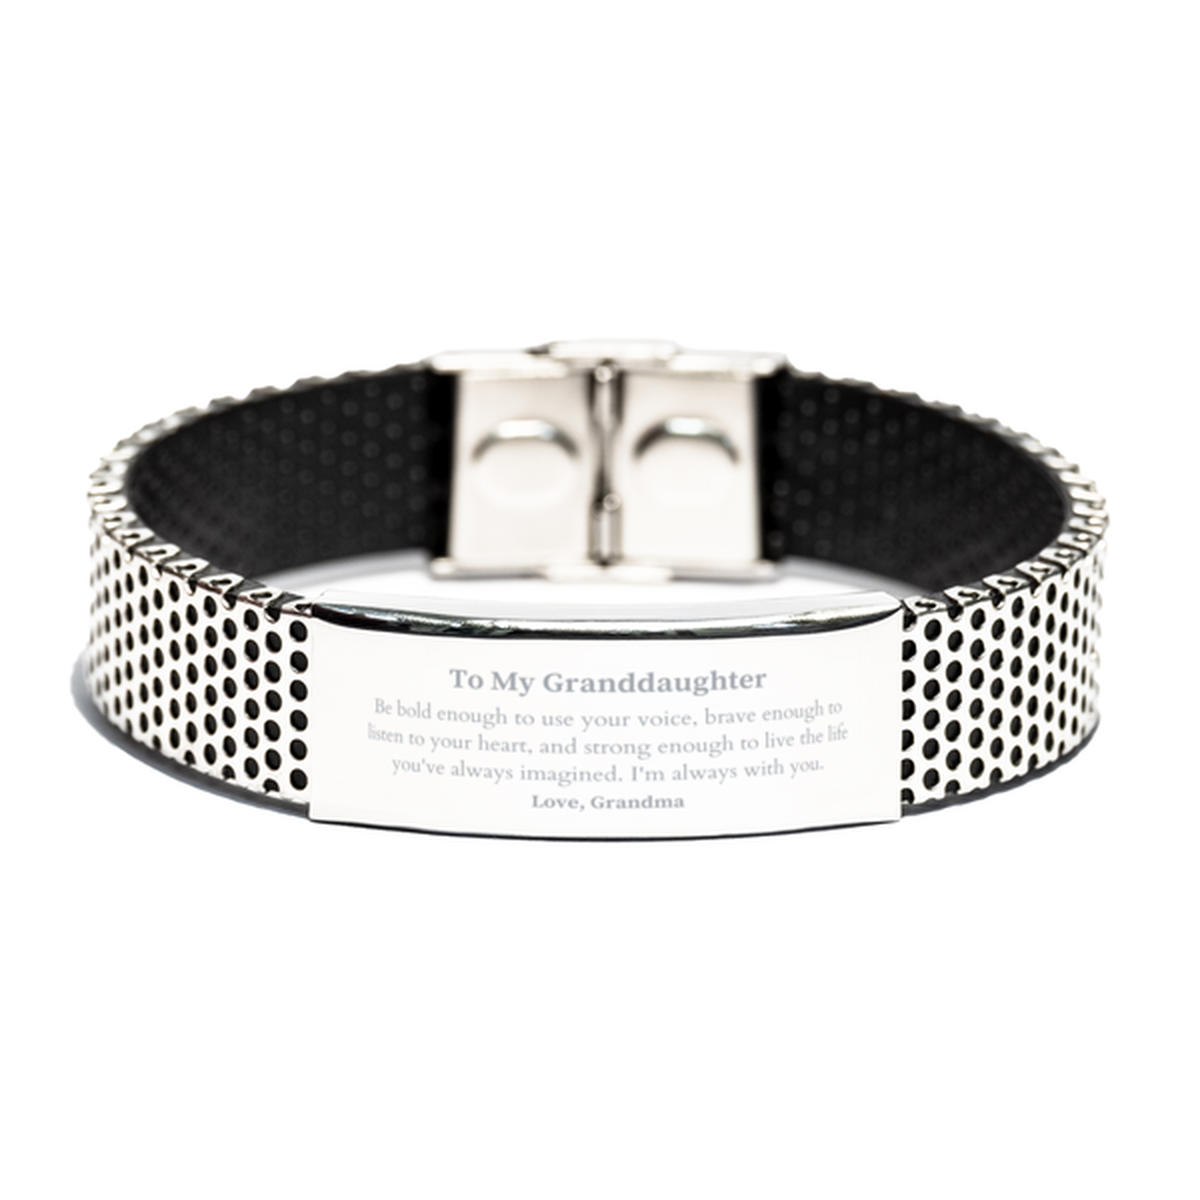 Keepsake Granddaughter Stainless Steel Bracelet Gift Idea Graduation Christmas Birthday Granddaughter from Grandma, Granddaughter Be bold enough to use your voice, brave enough to listen to your heart. Love, Grandma